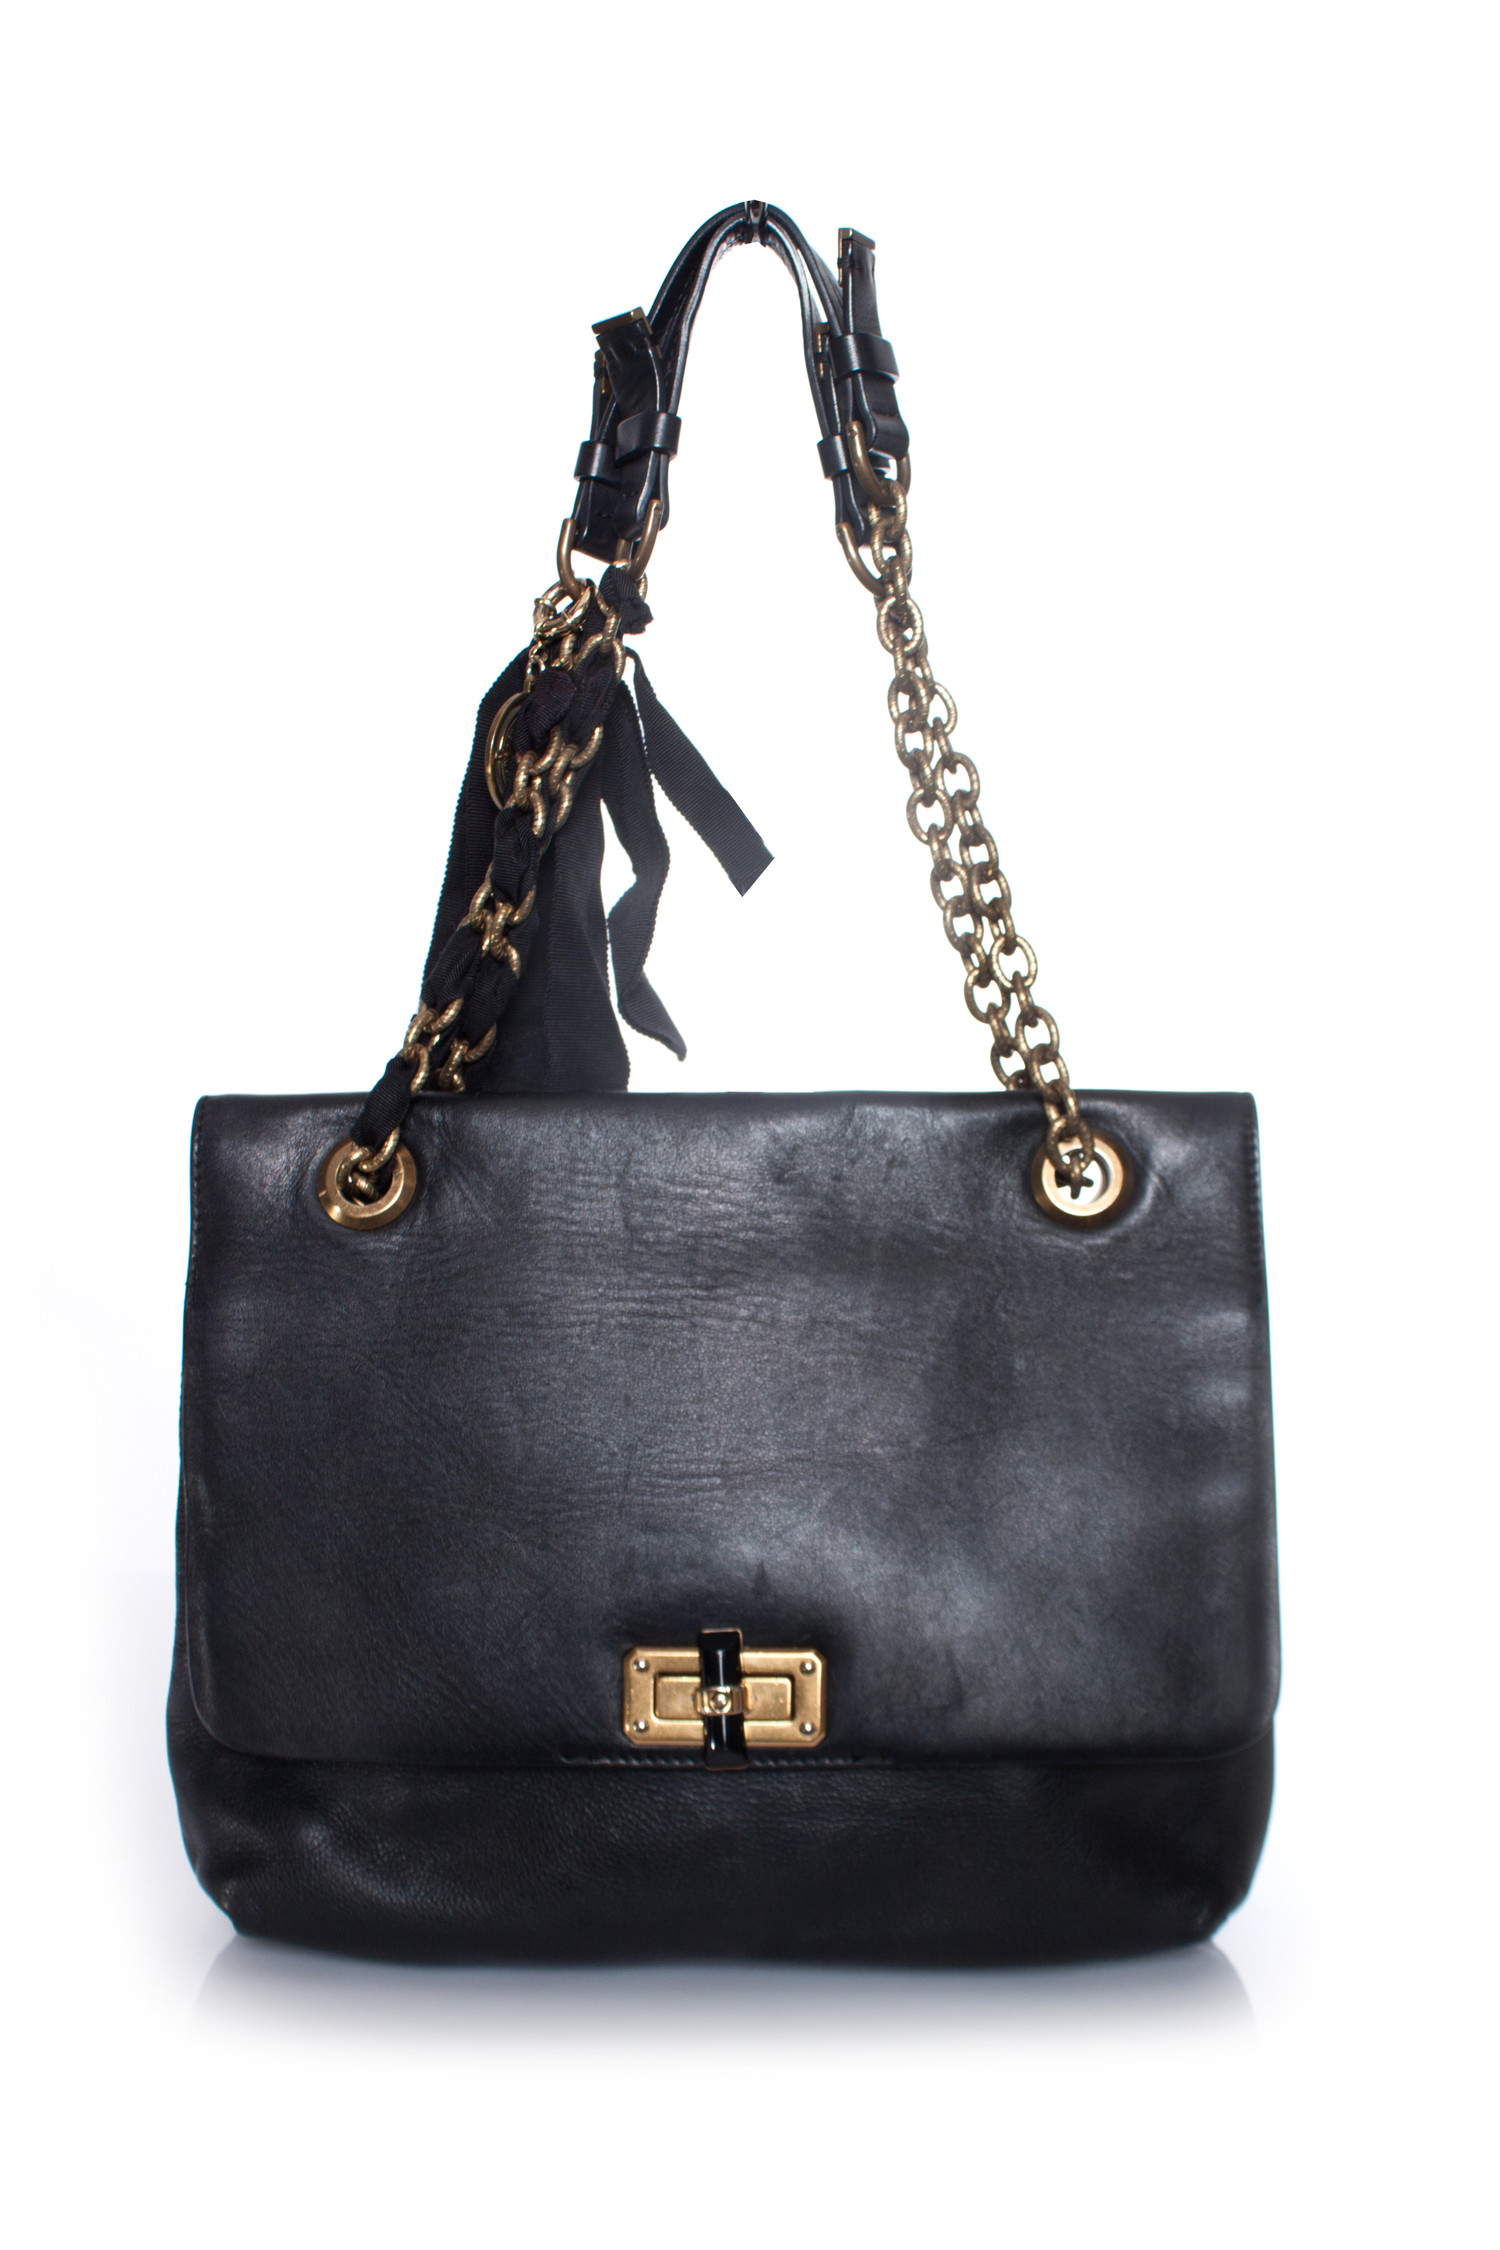 222CLOVERSOFT Suede chain bag - null - Maje.com